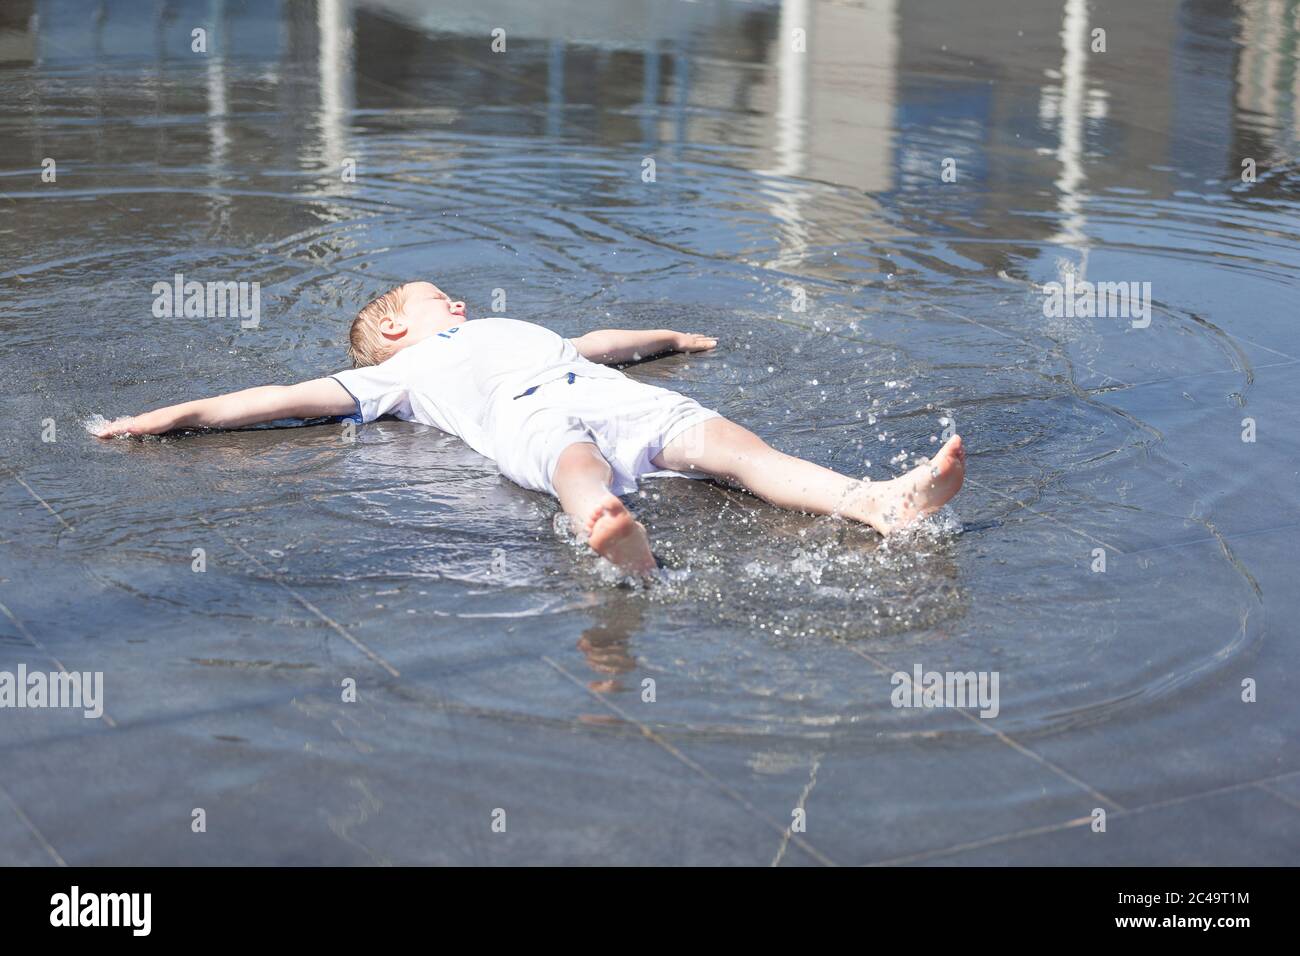 Little boy lying in shallow water fountains on a hot day, UK Stock Photo